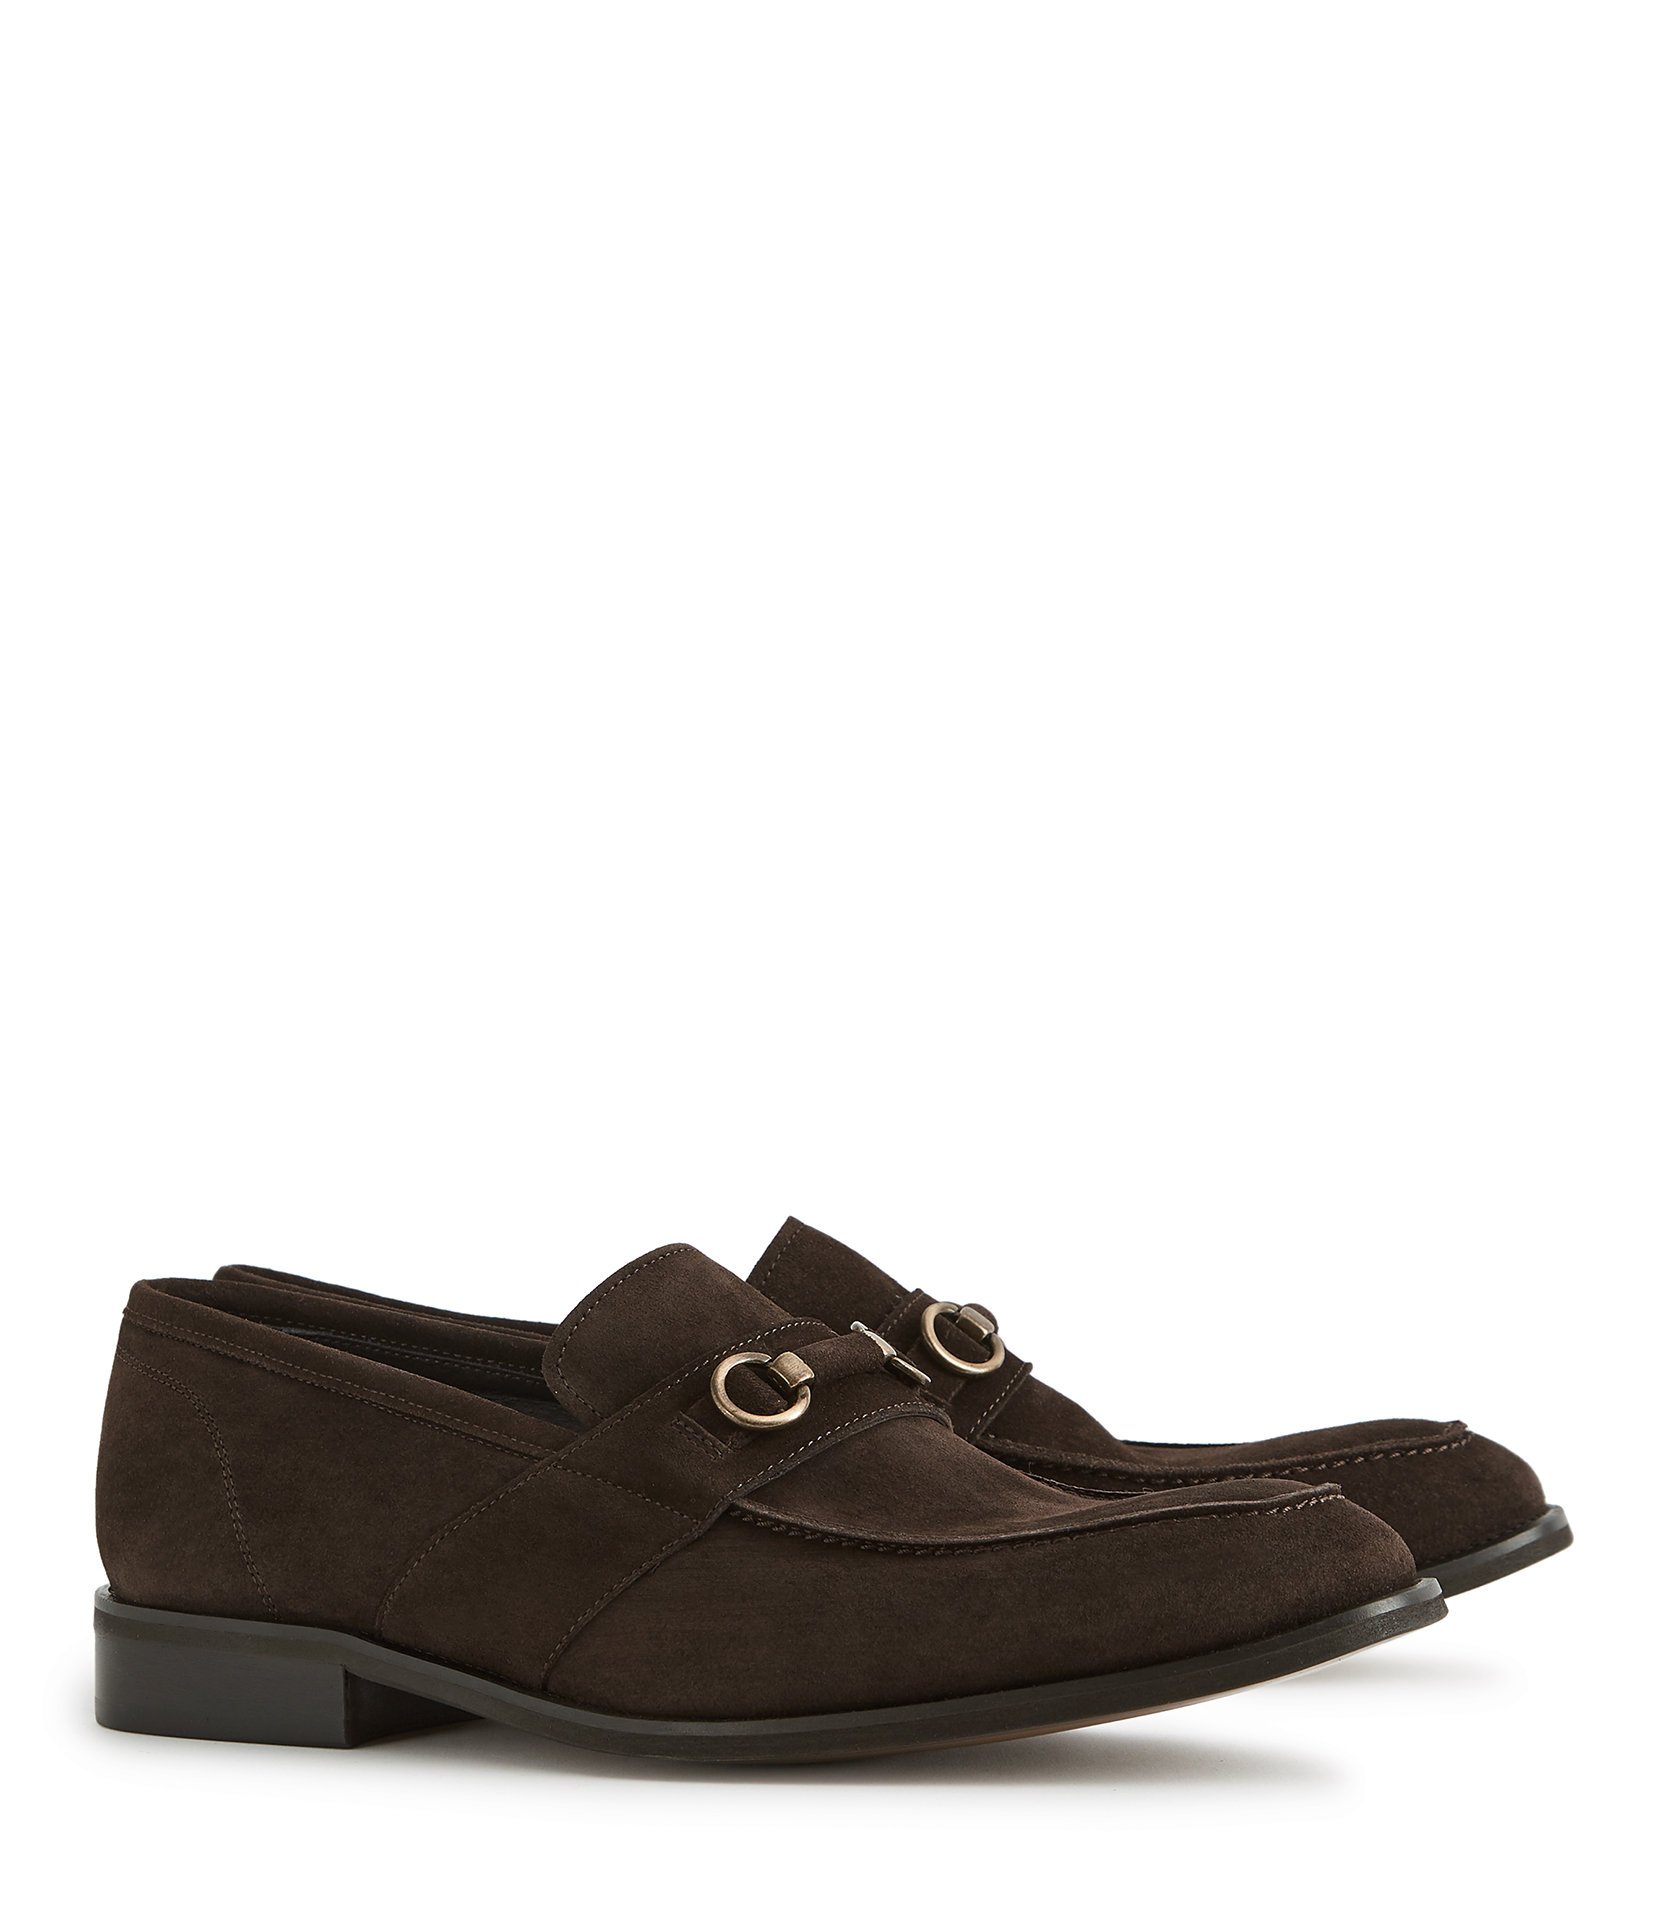 REISS Brown Tan Suede Loafers